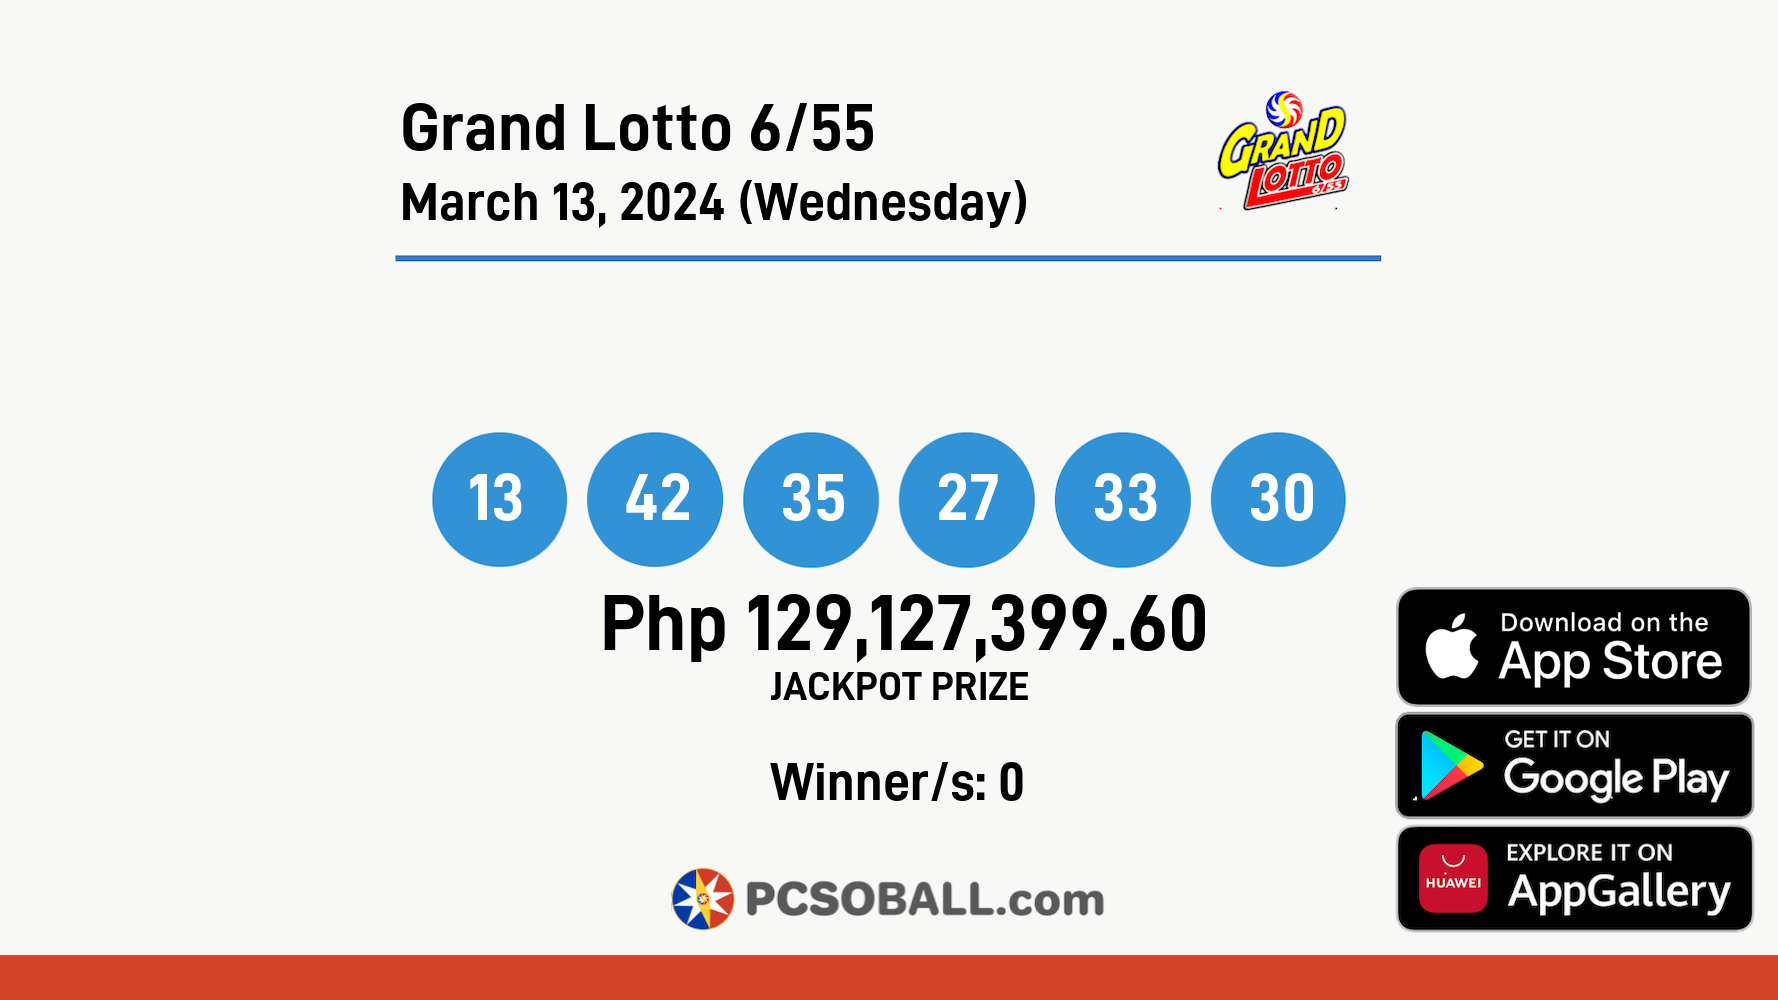 Grand Lotto 6/55 March 13, 2024 (Wednesday) Result